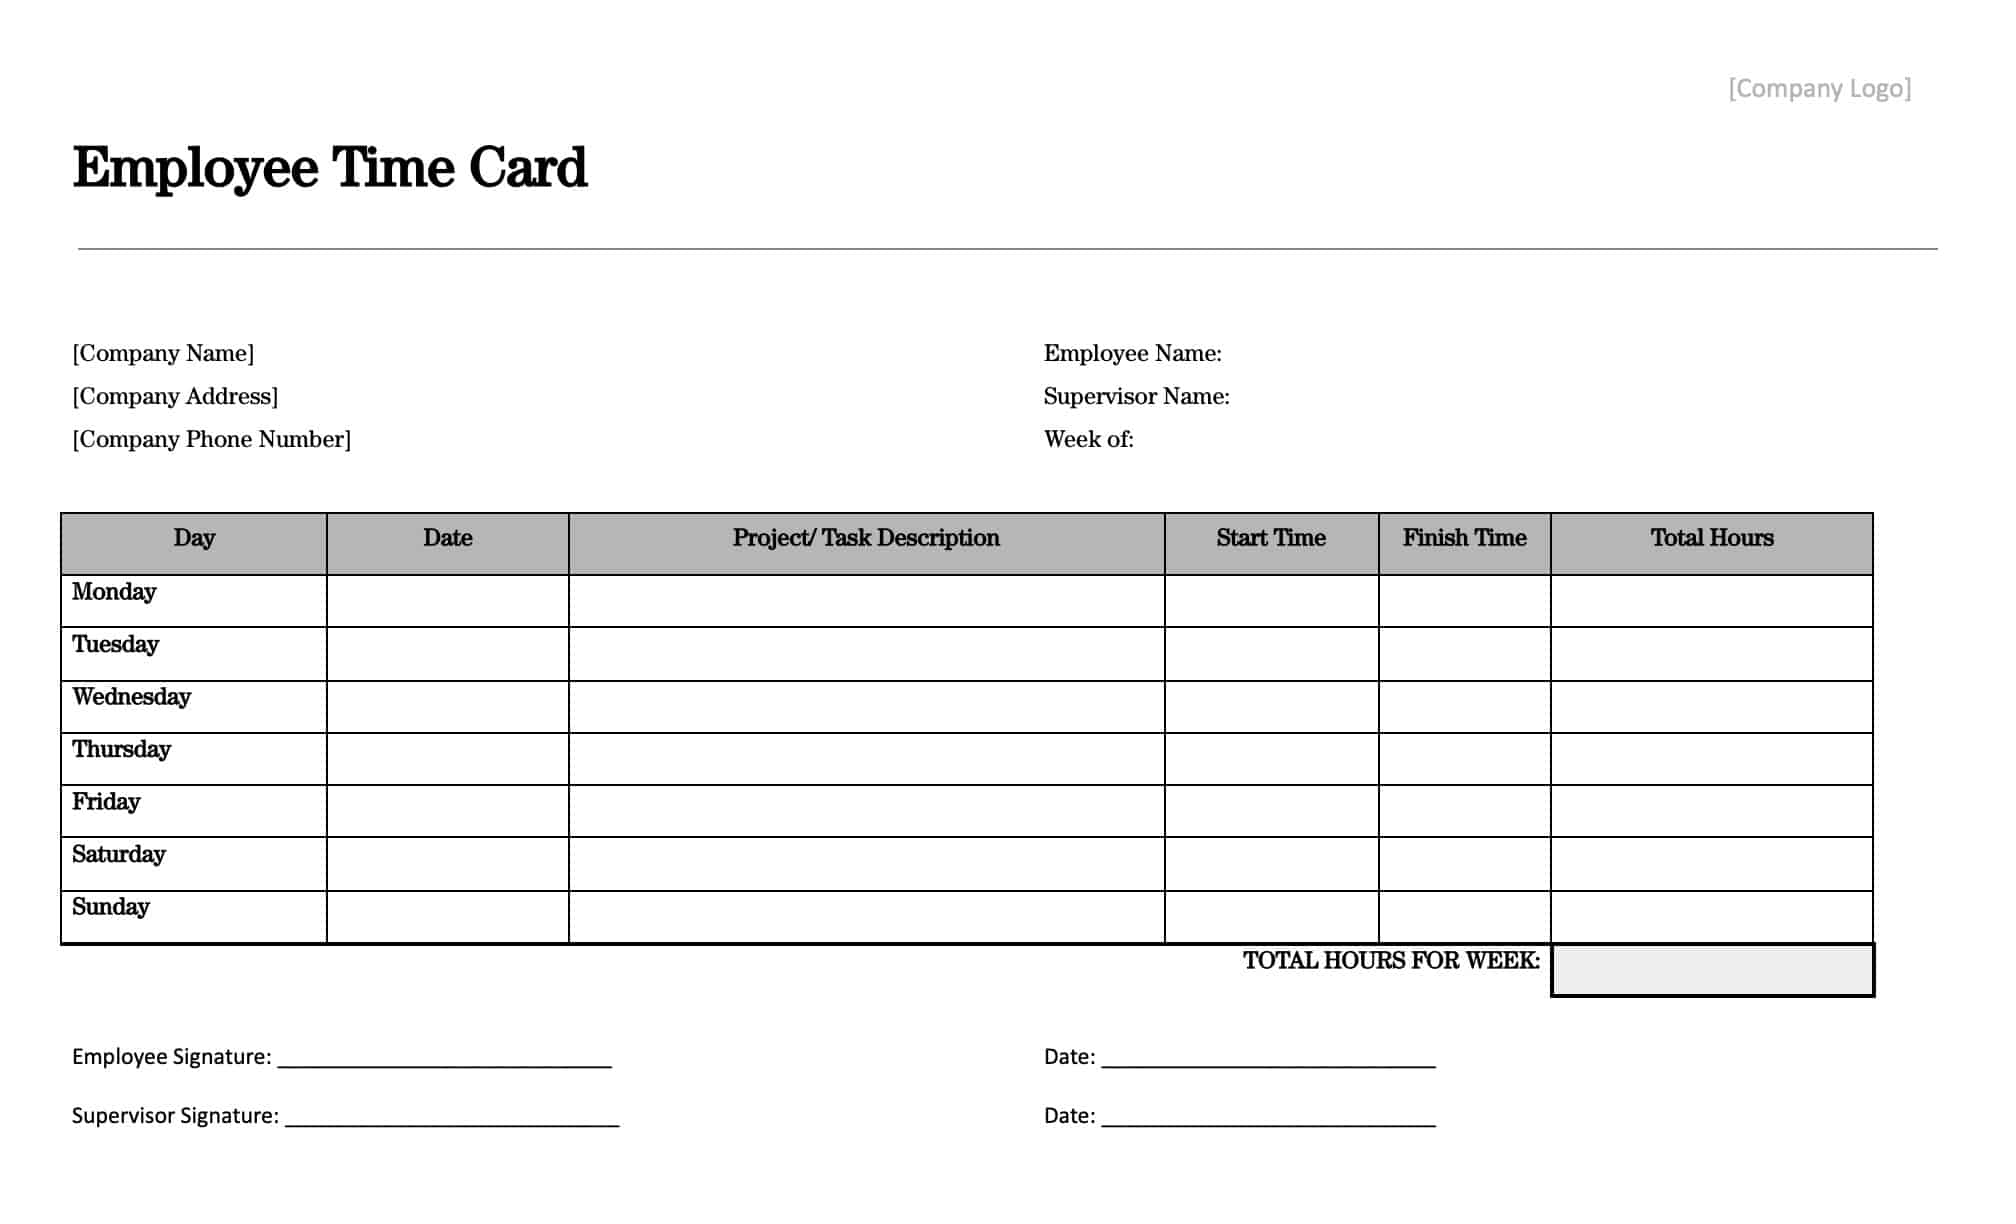 Time Card Templates Download & Print for Free!